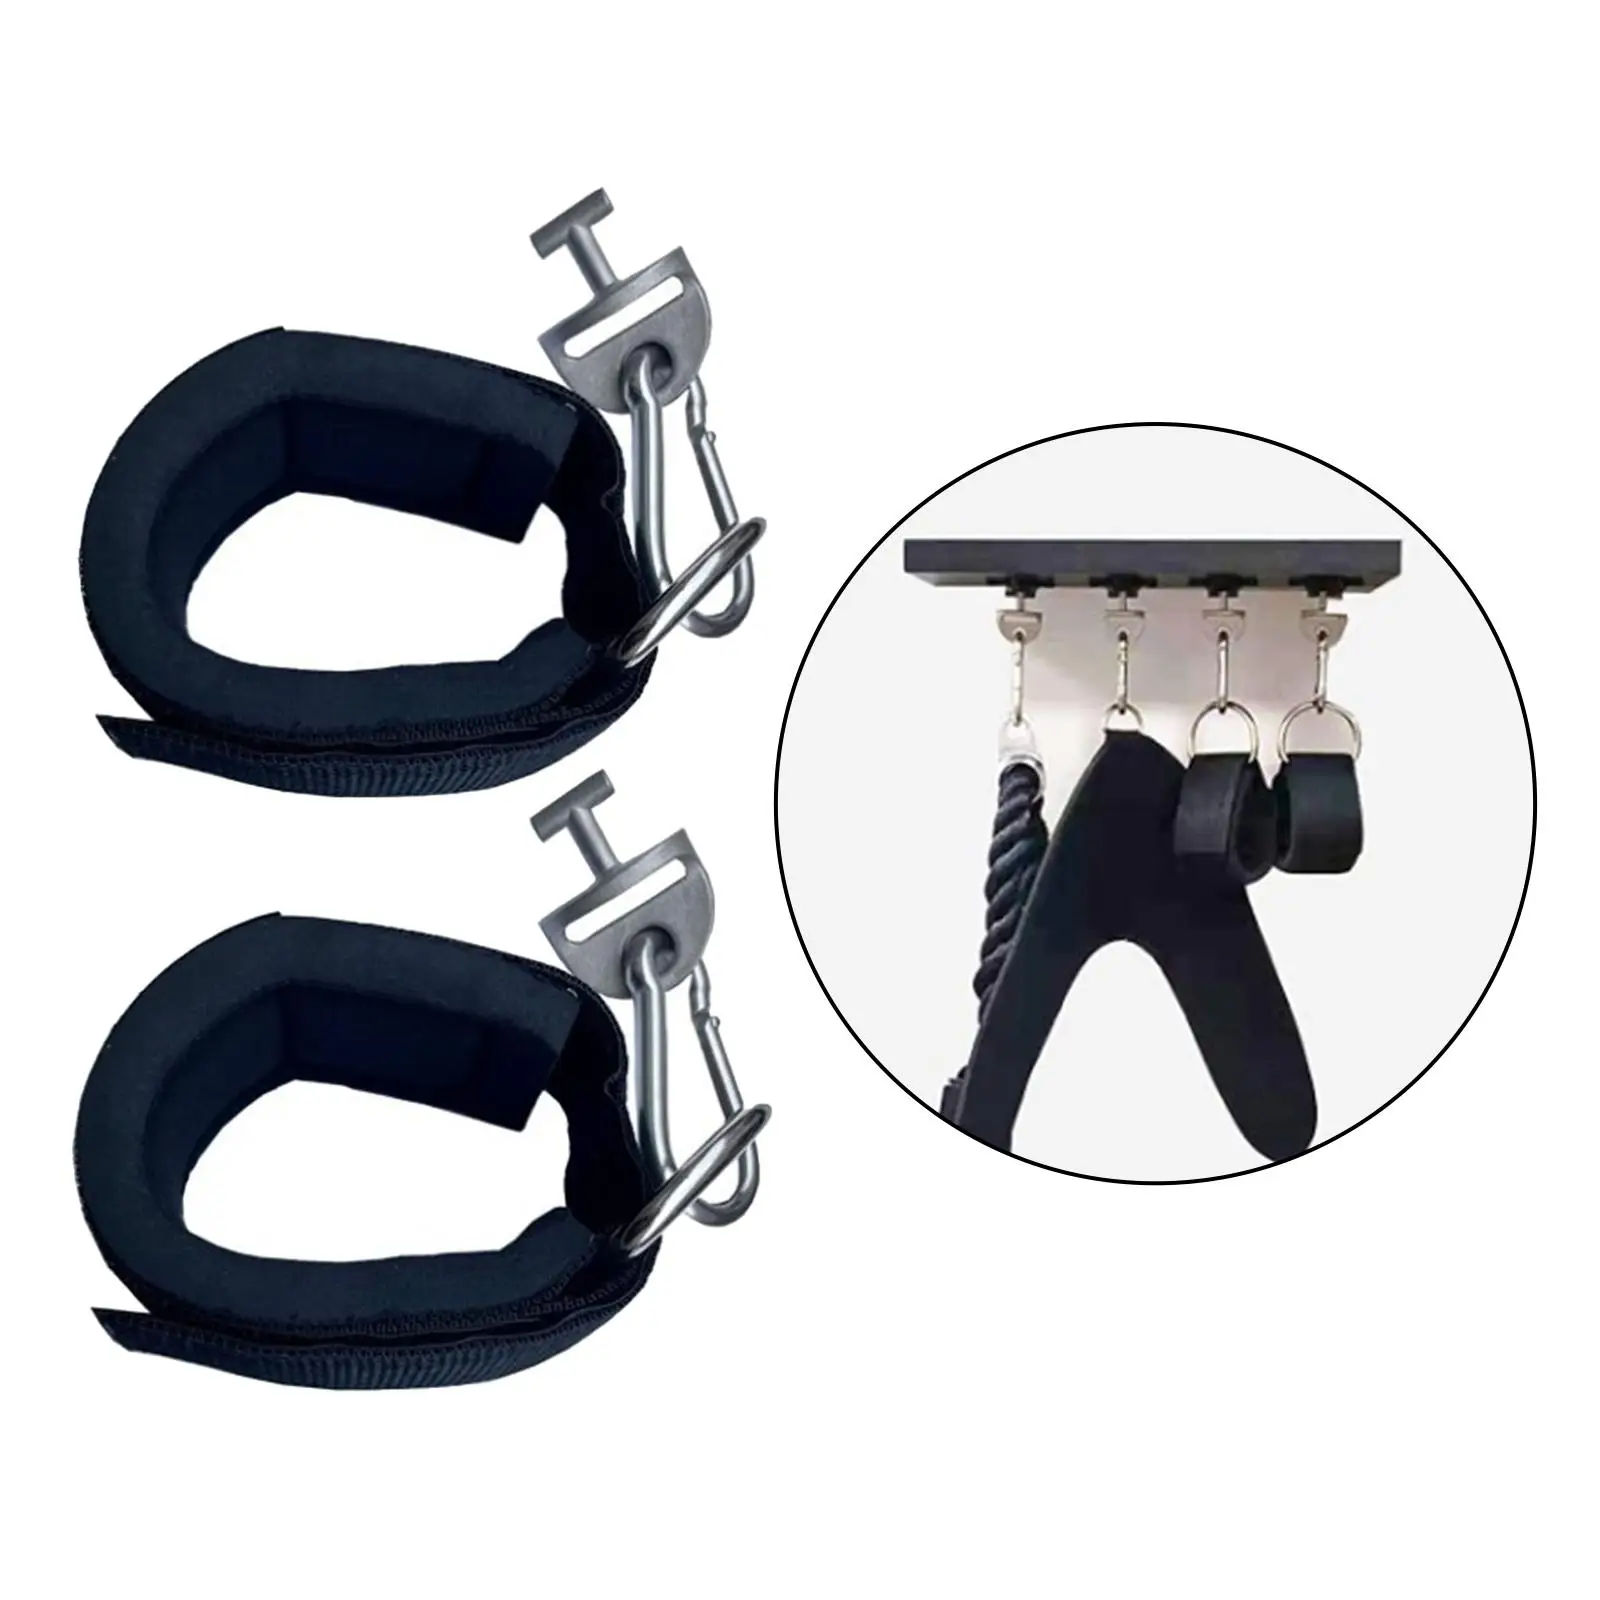 Ankle Straps for Tonal Cable Machine Tonal Attachment for Kickbacks Glute